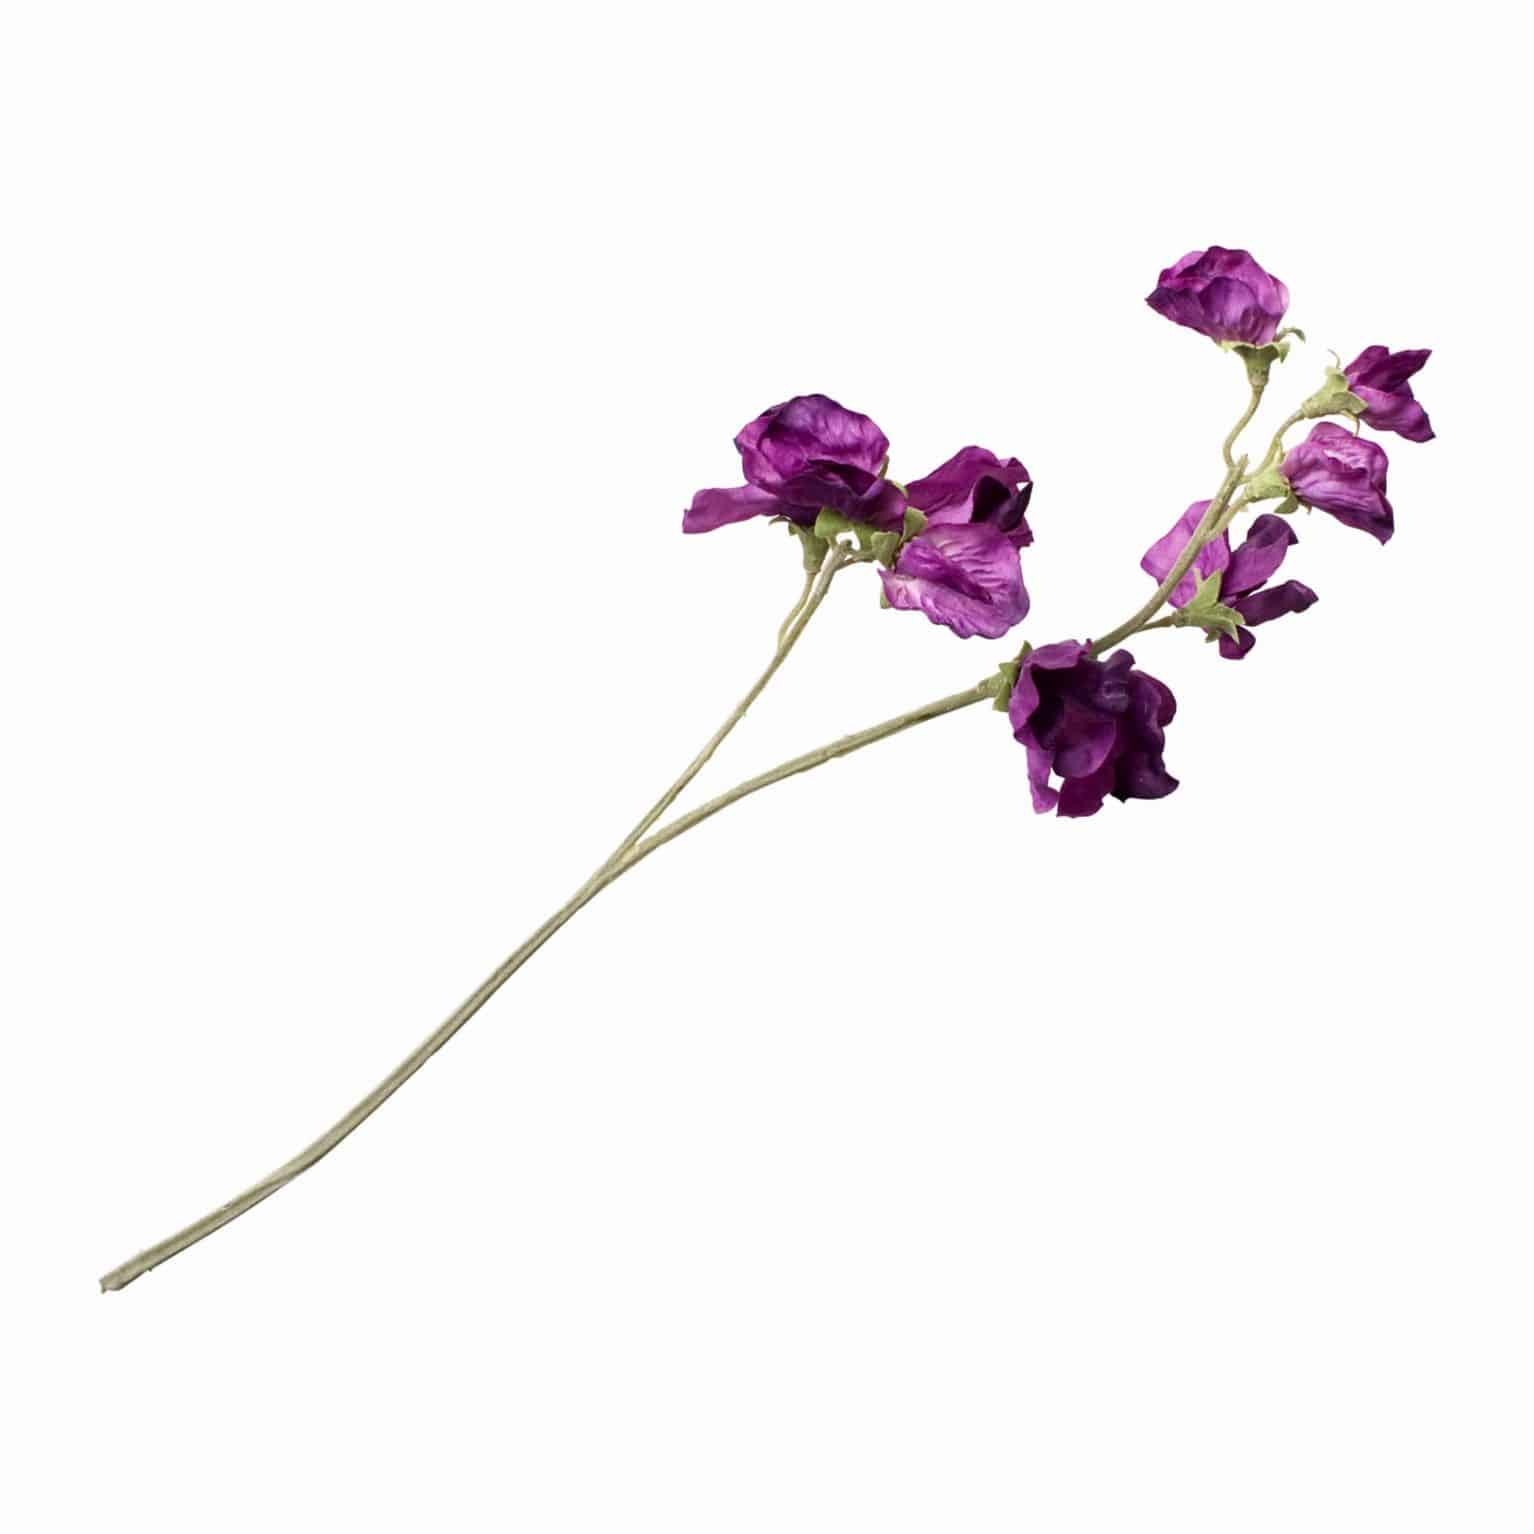 Buy luxurious purple faux sweet pea flowers in flawless detail. A beautiful addition to any arrangement